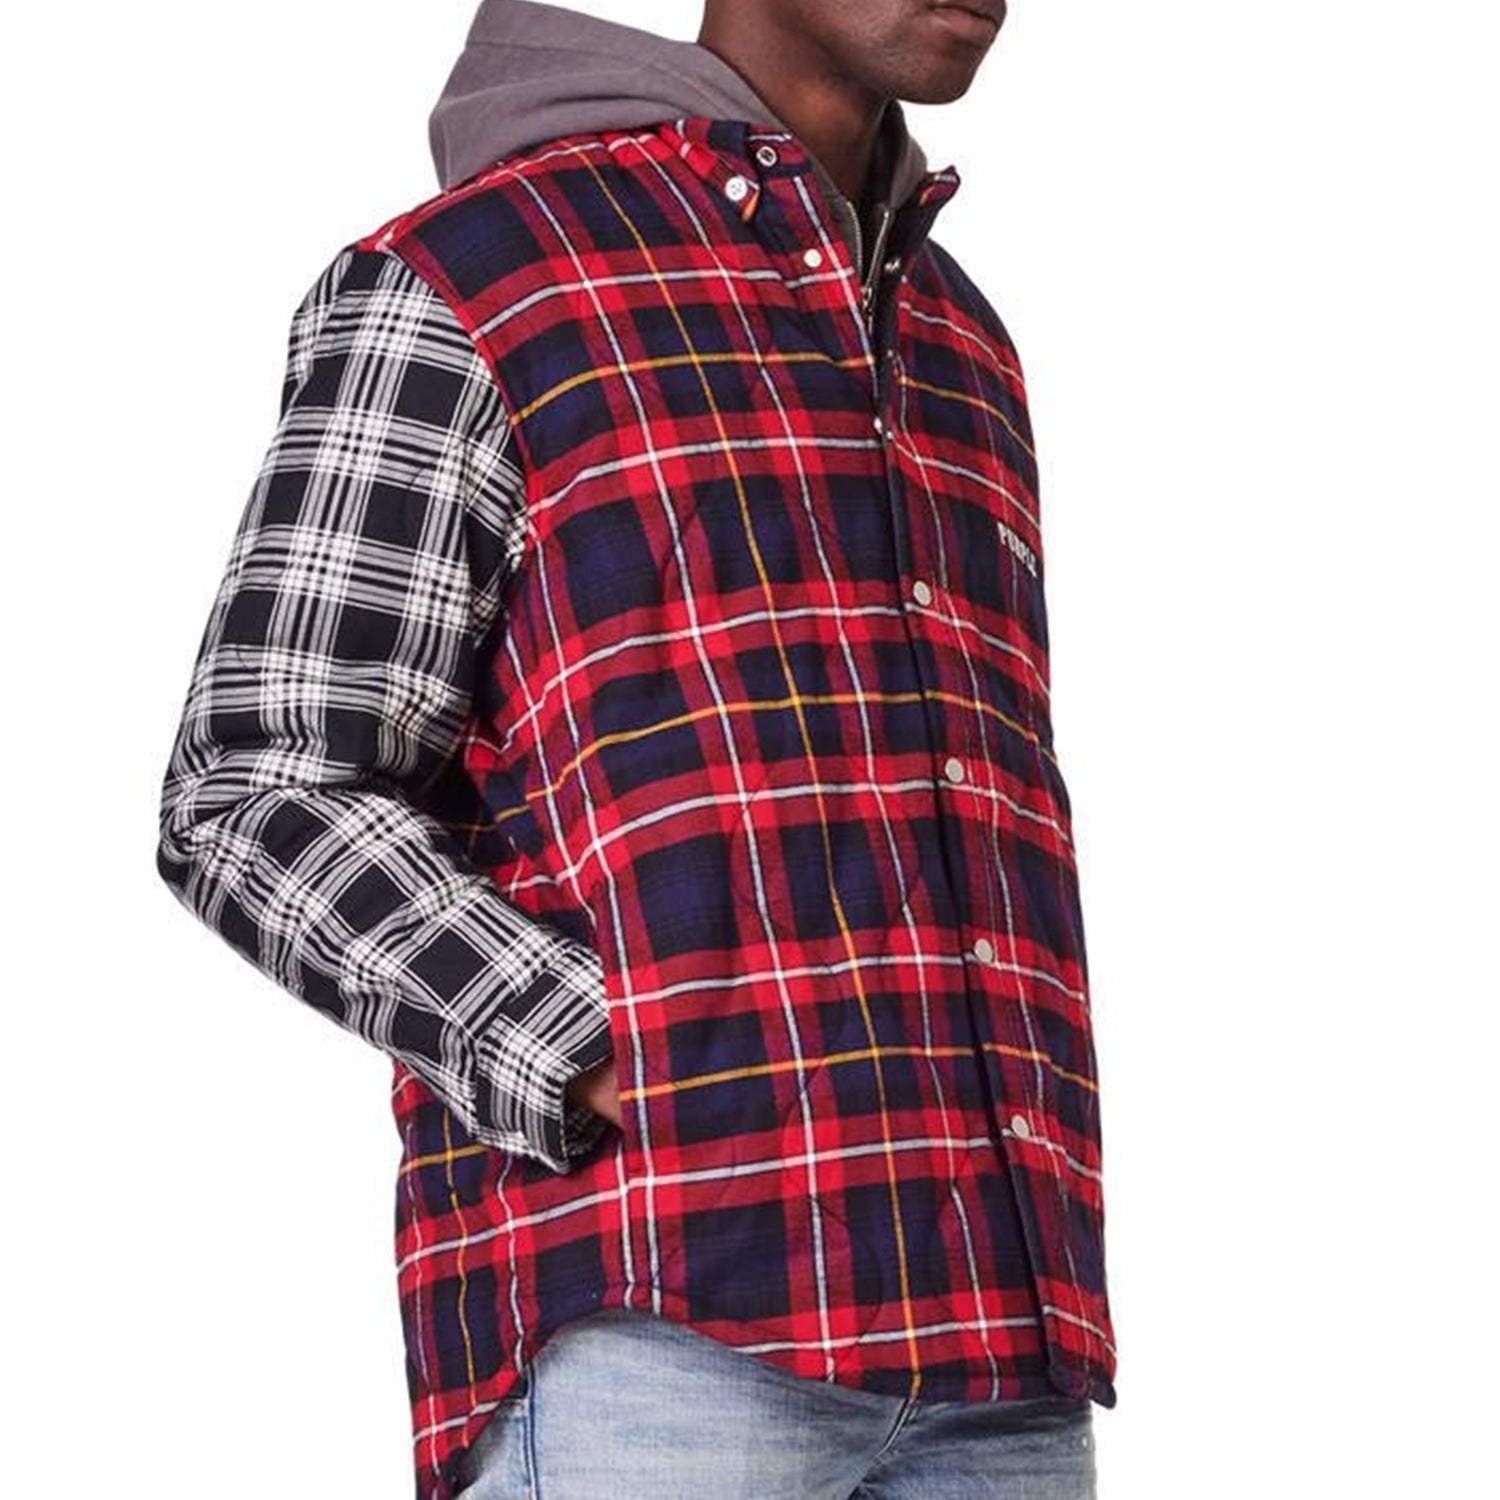 Purple-brand Quilted Plaid Shirt Mens Style : P313-qpre122